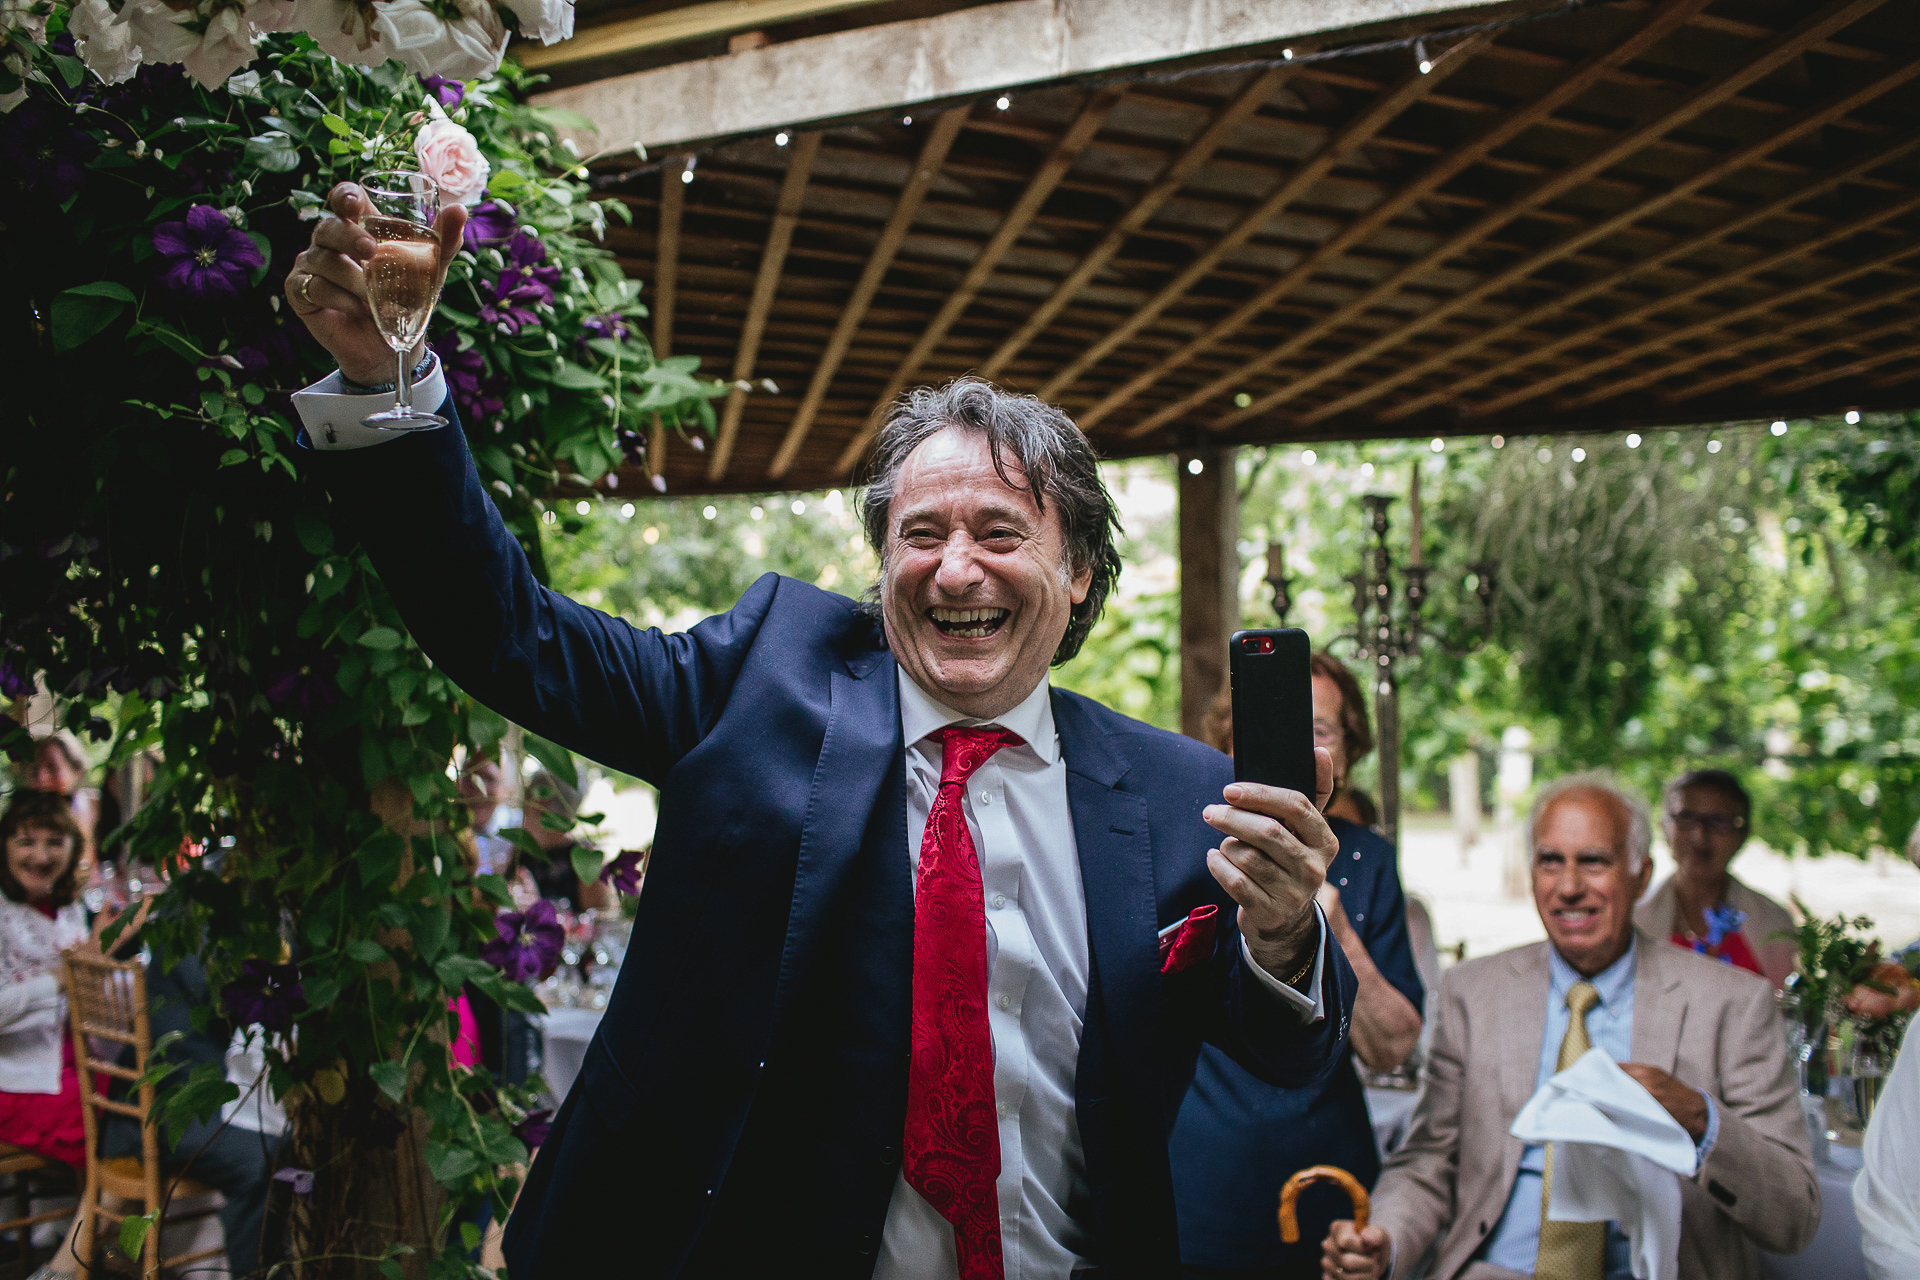 Wedding guest grinning broadly and waving champagne